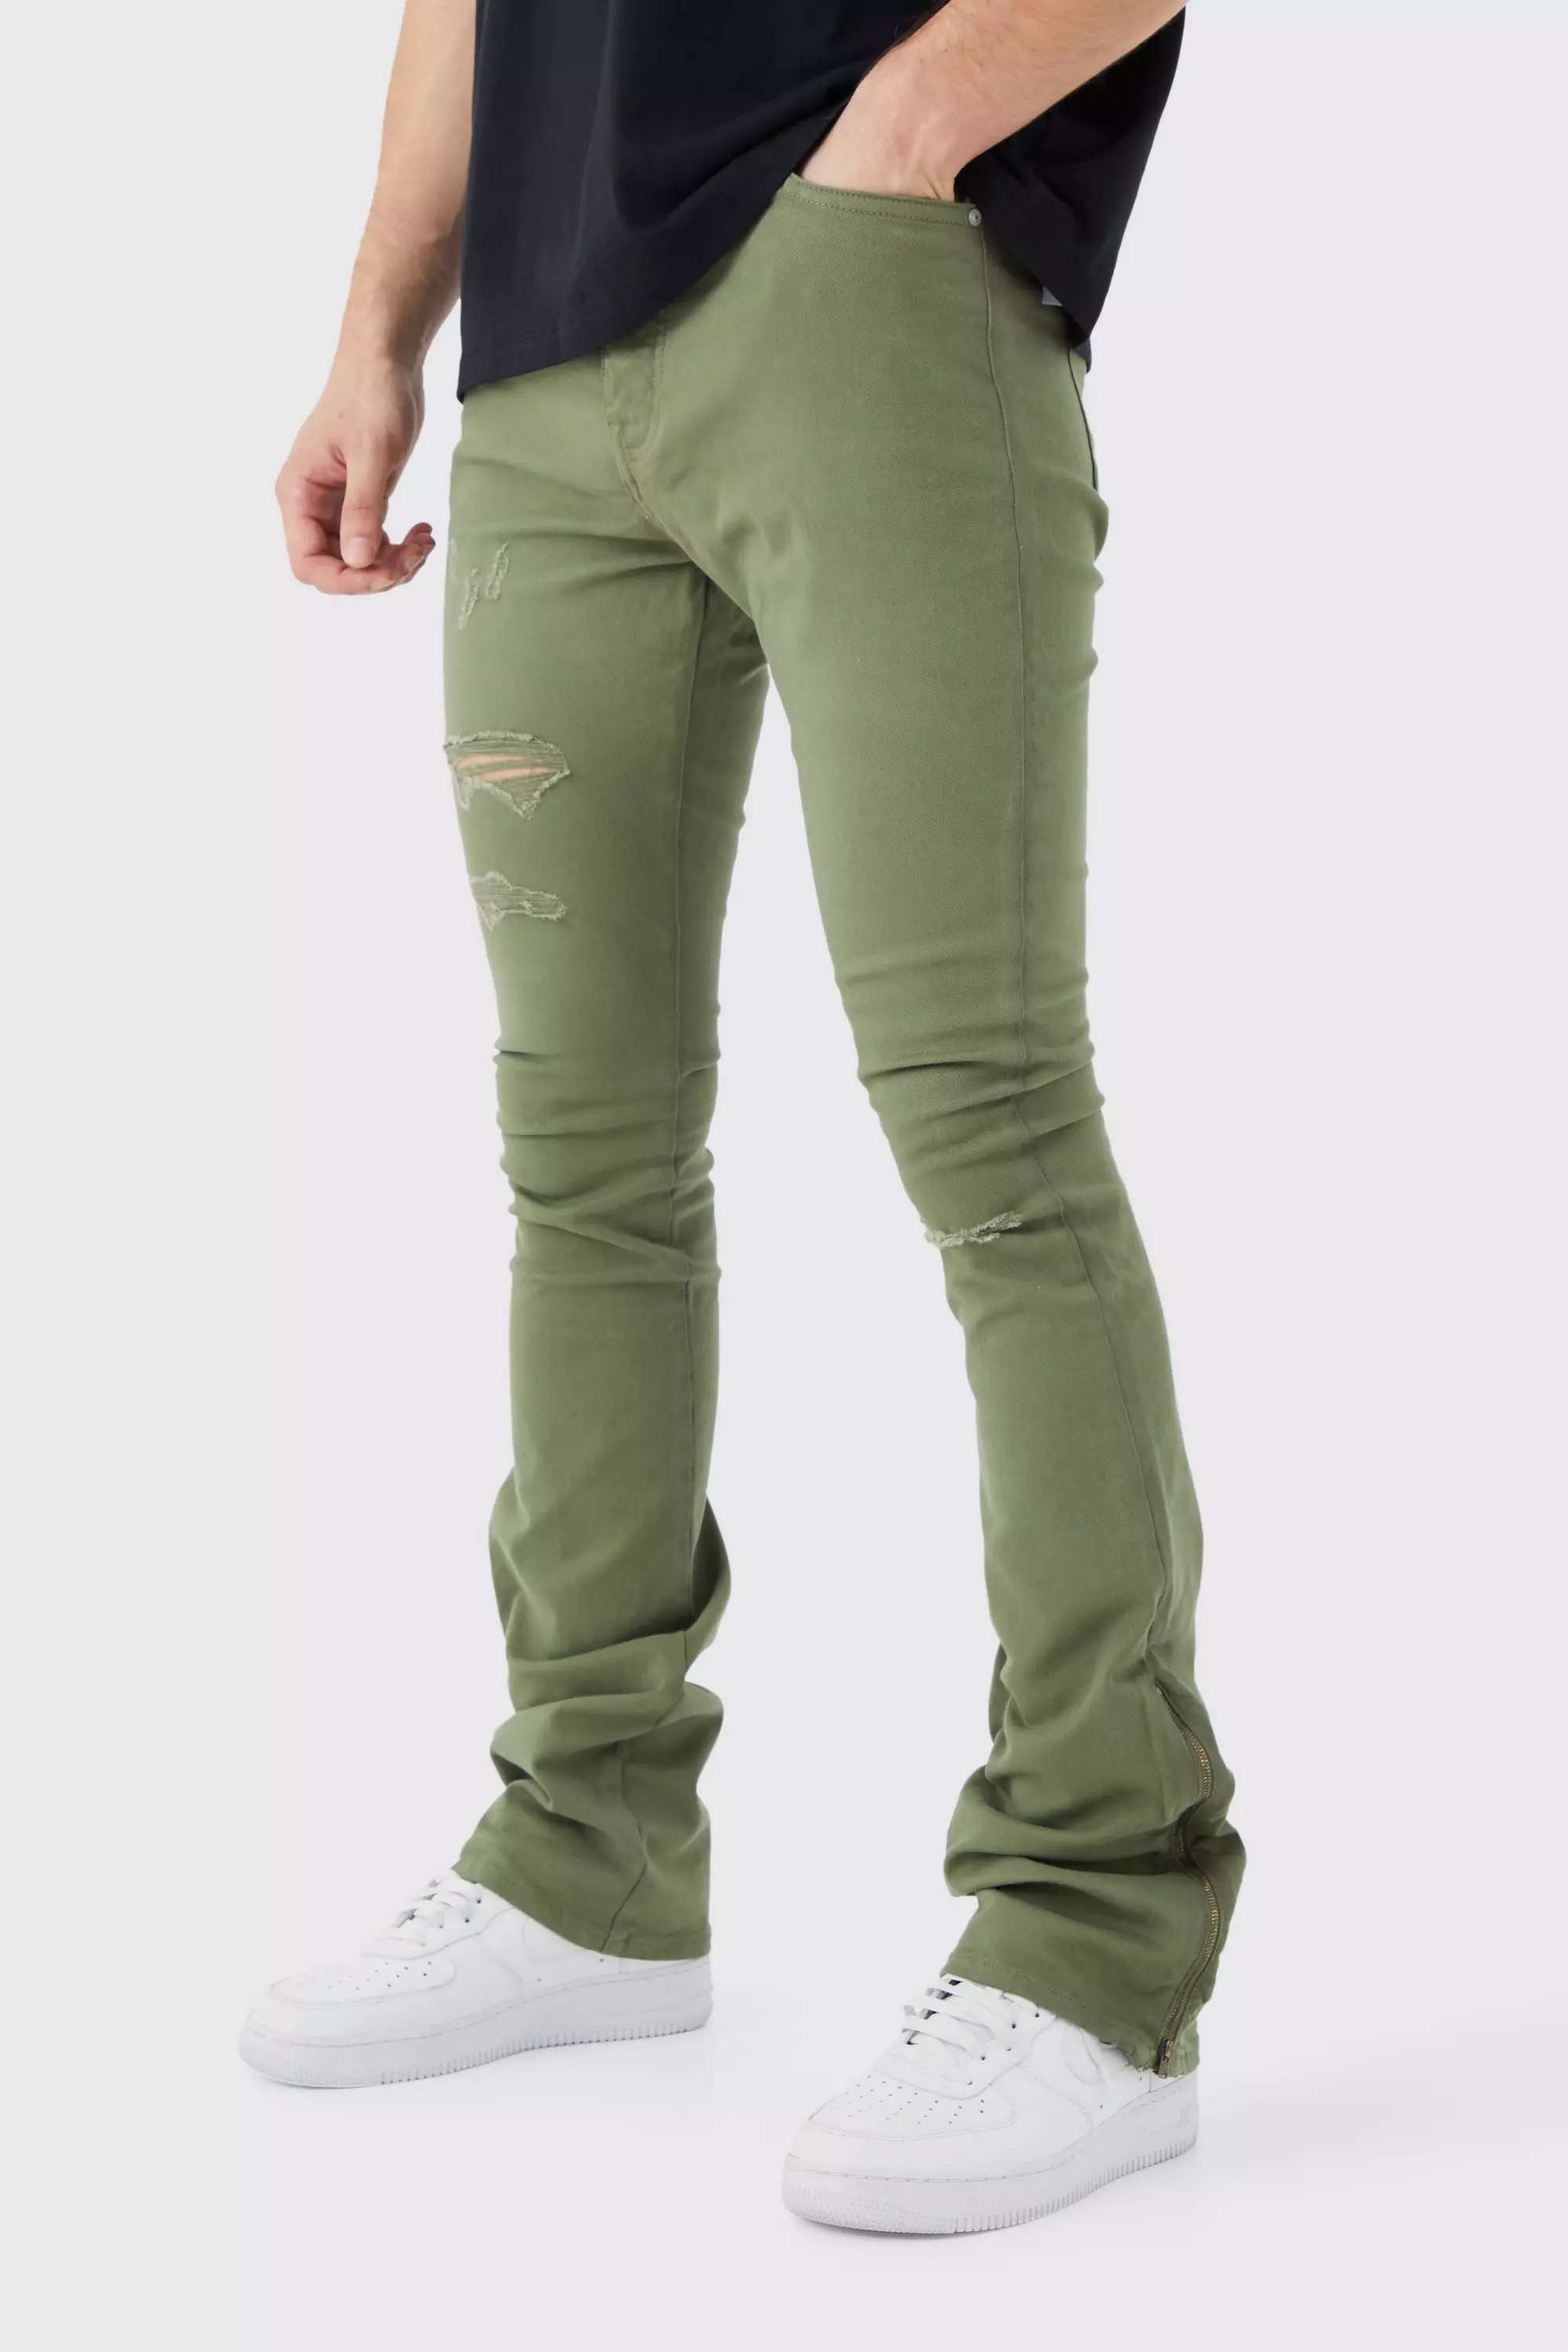 Tall Fixed Waist Rip And Repair Zip Gusset Pants Olive